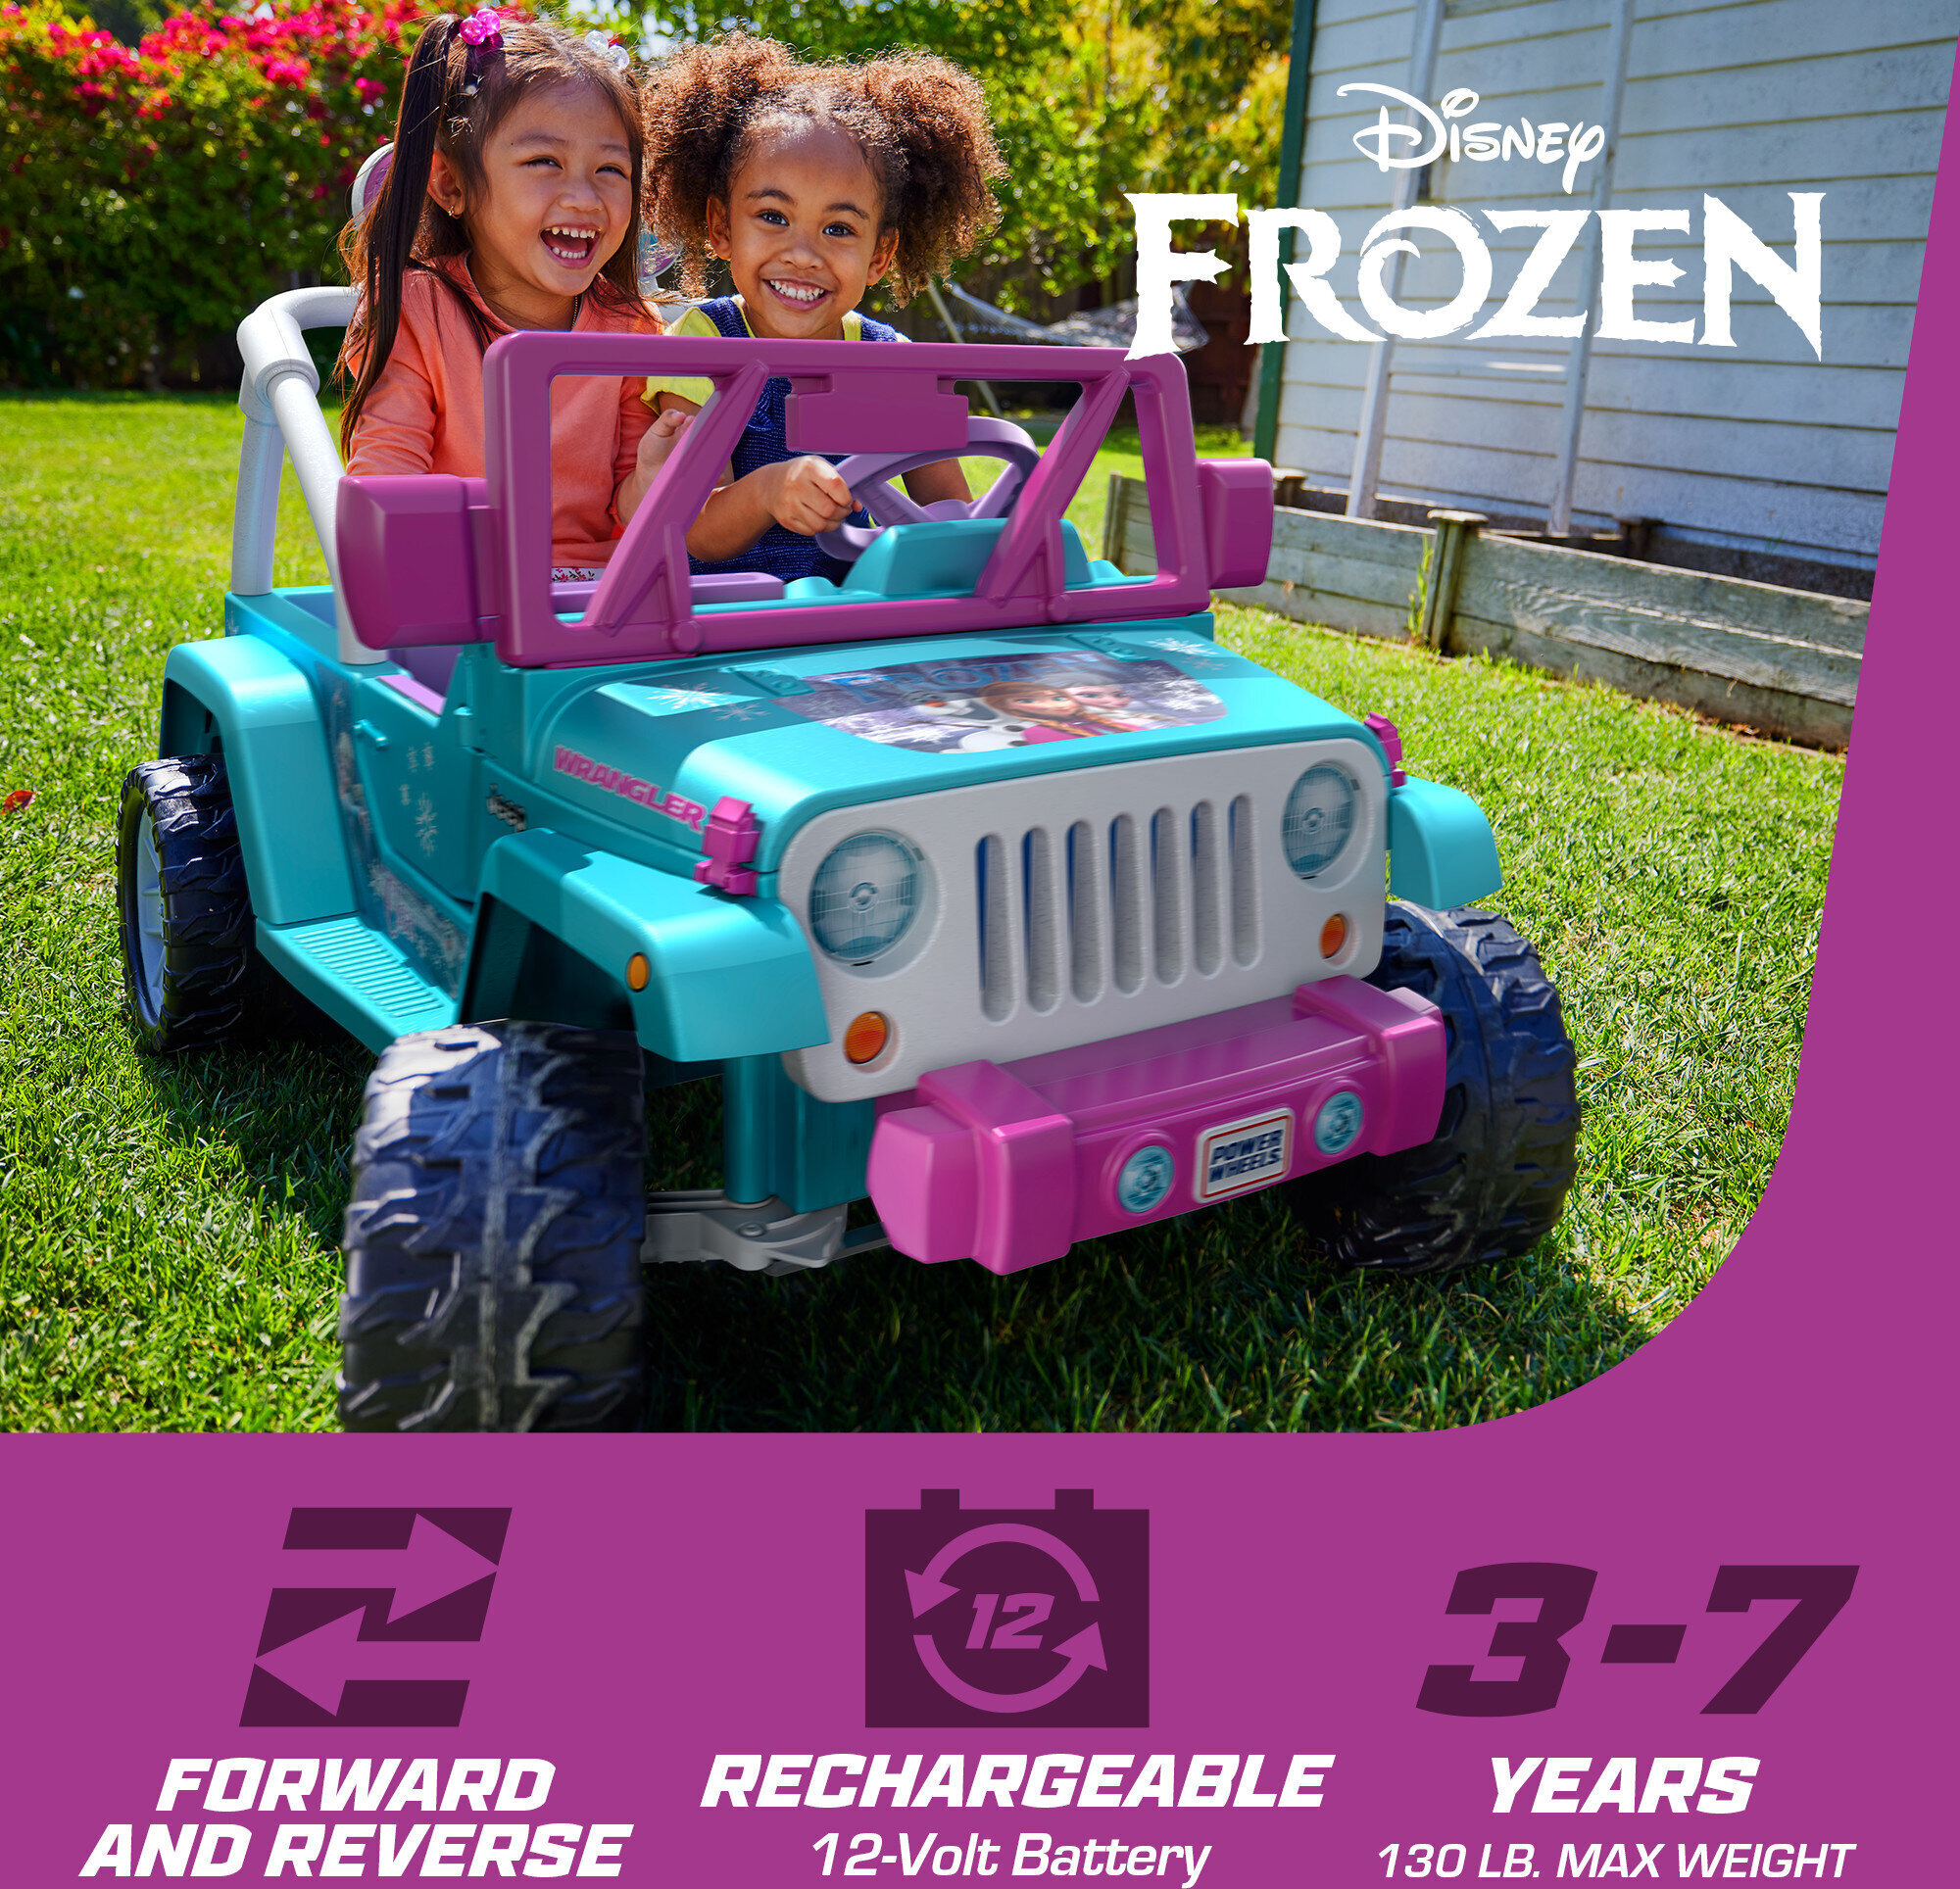 12V Power Wheels Disney Frozen Jeep Wrangler Battery-Powered Ride-On Toy Vehicle with Music & Sounds, for a Child Ages 3-7 - image 3 of 7